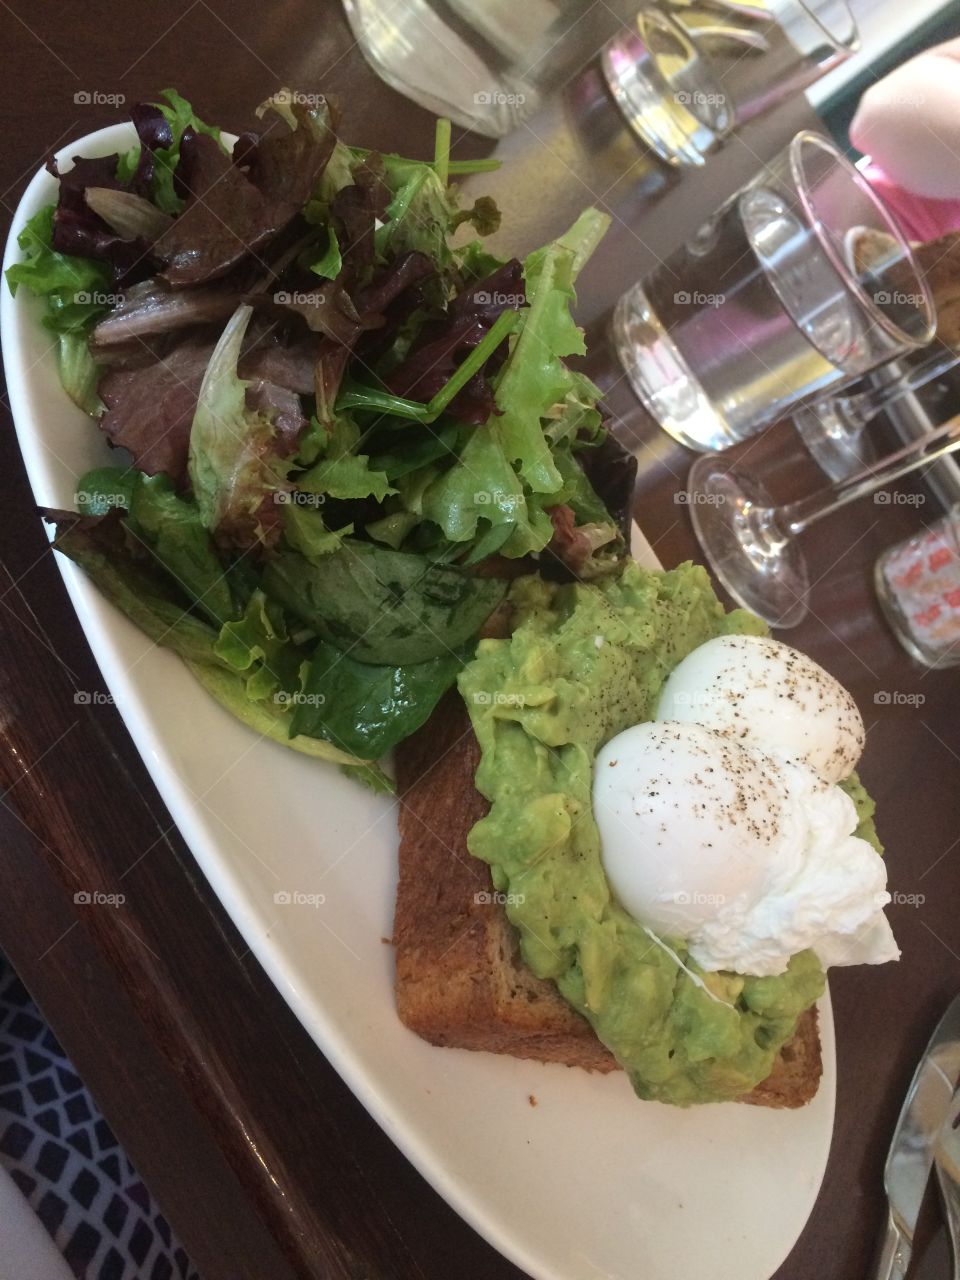 Avocado toast with a salad on the side